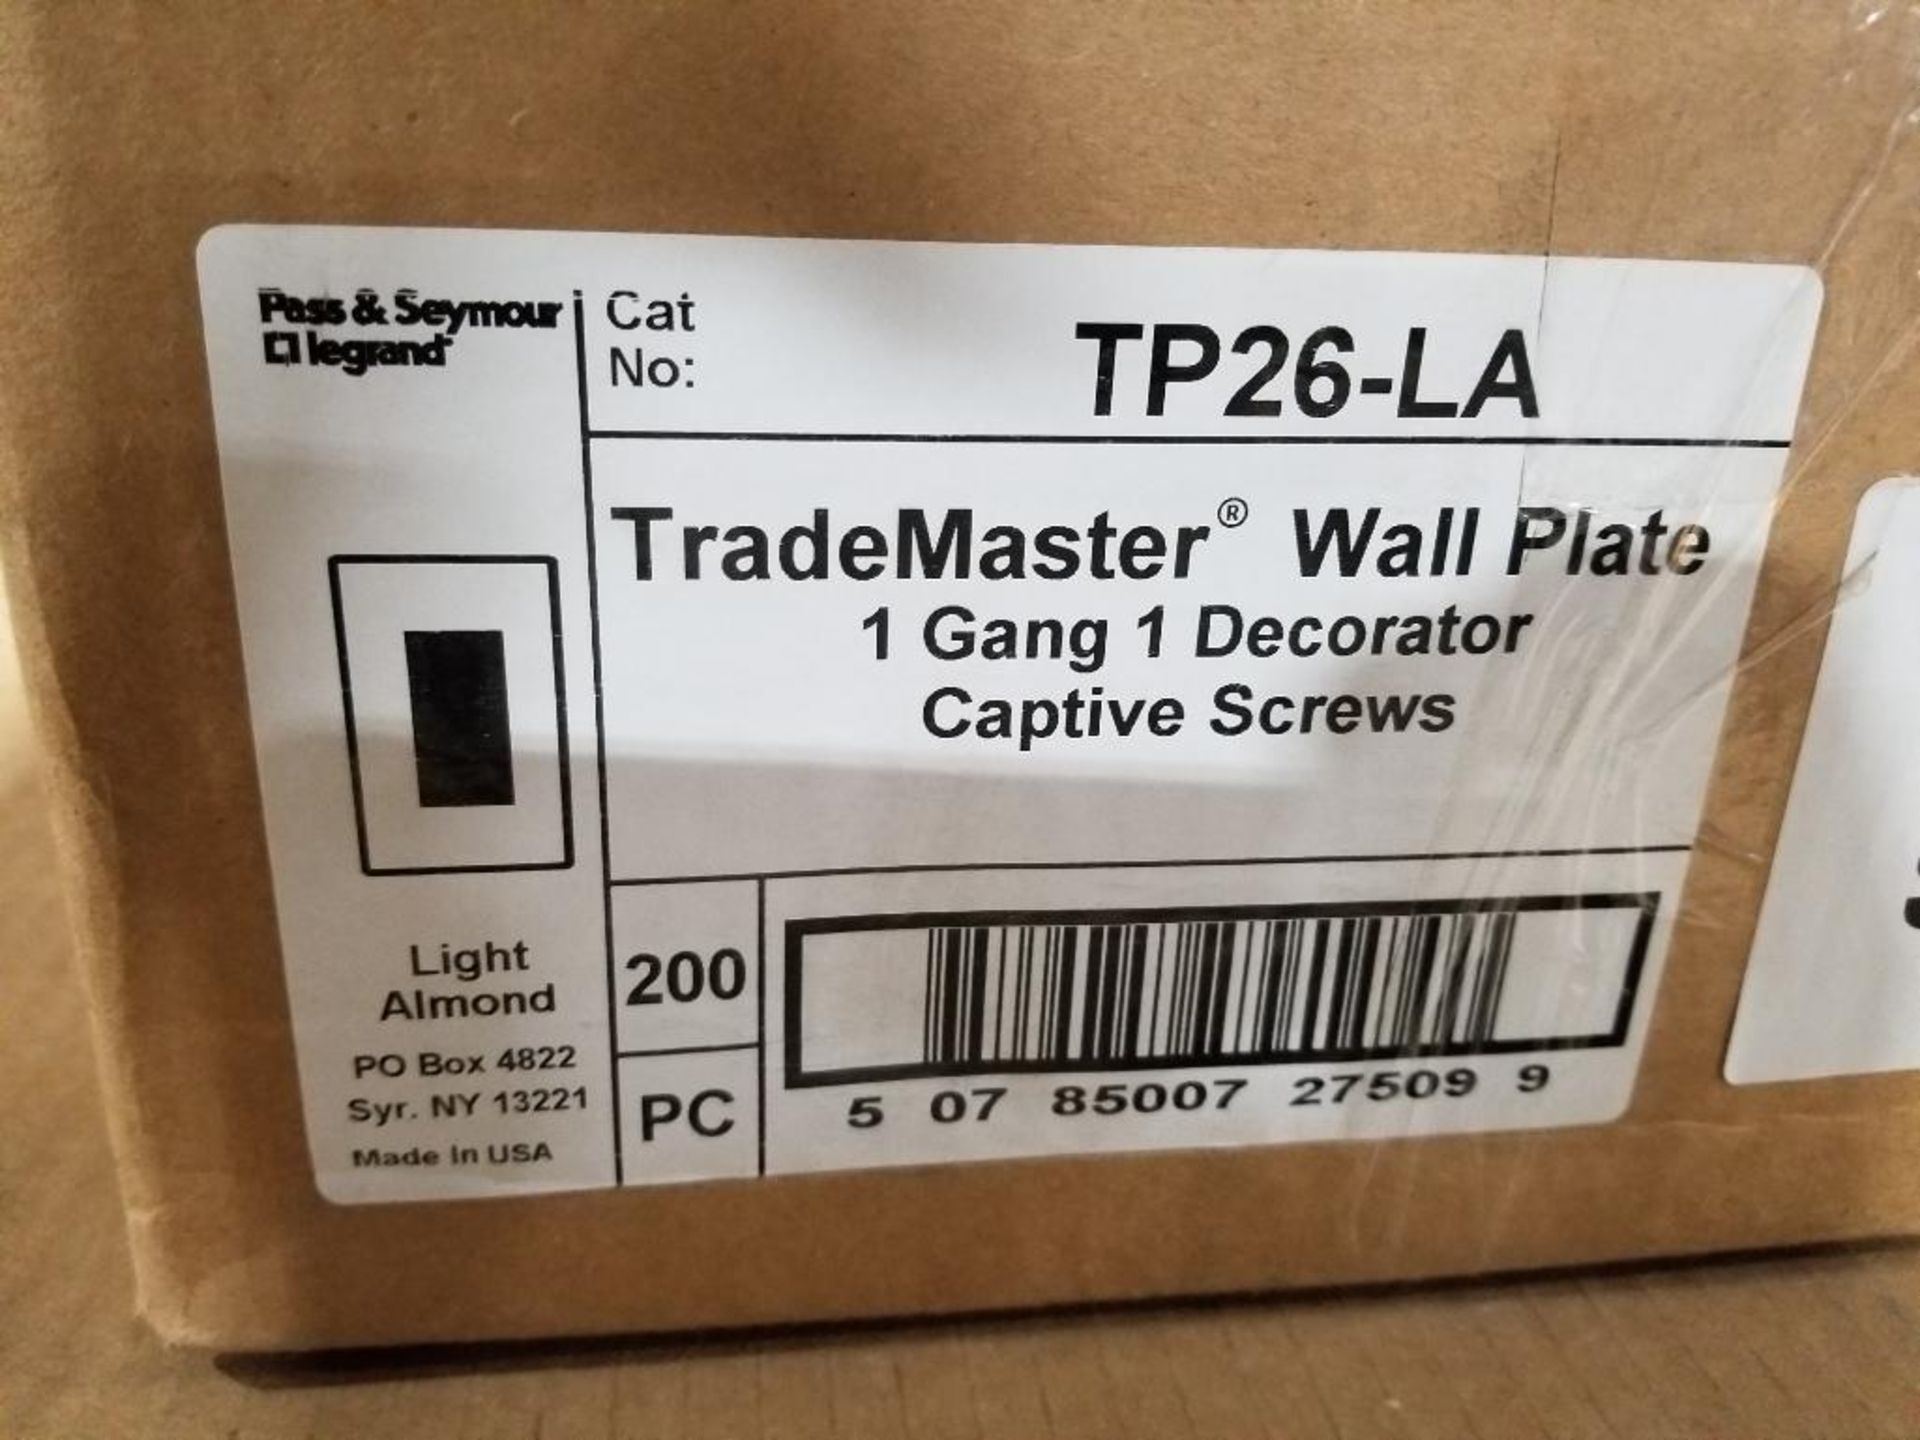 Qty 200 - Legrand Trademaster wall plate. Single gang. Part number TP26-LA. Light Almond. - Image 4 of 6